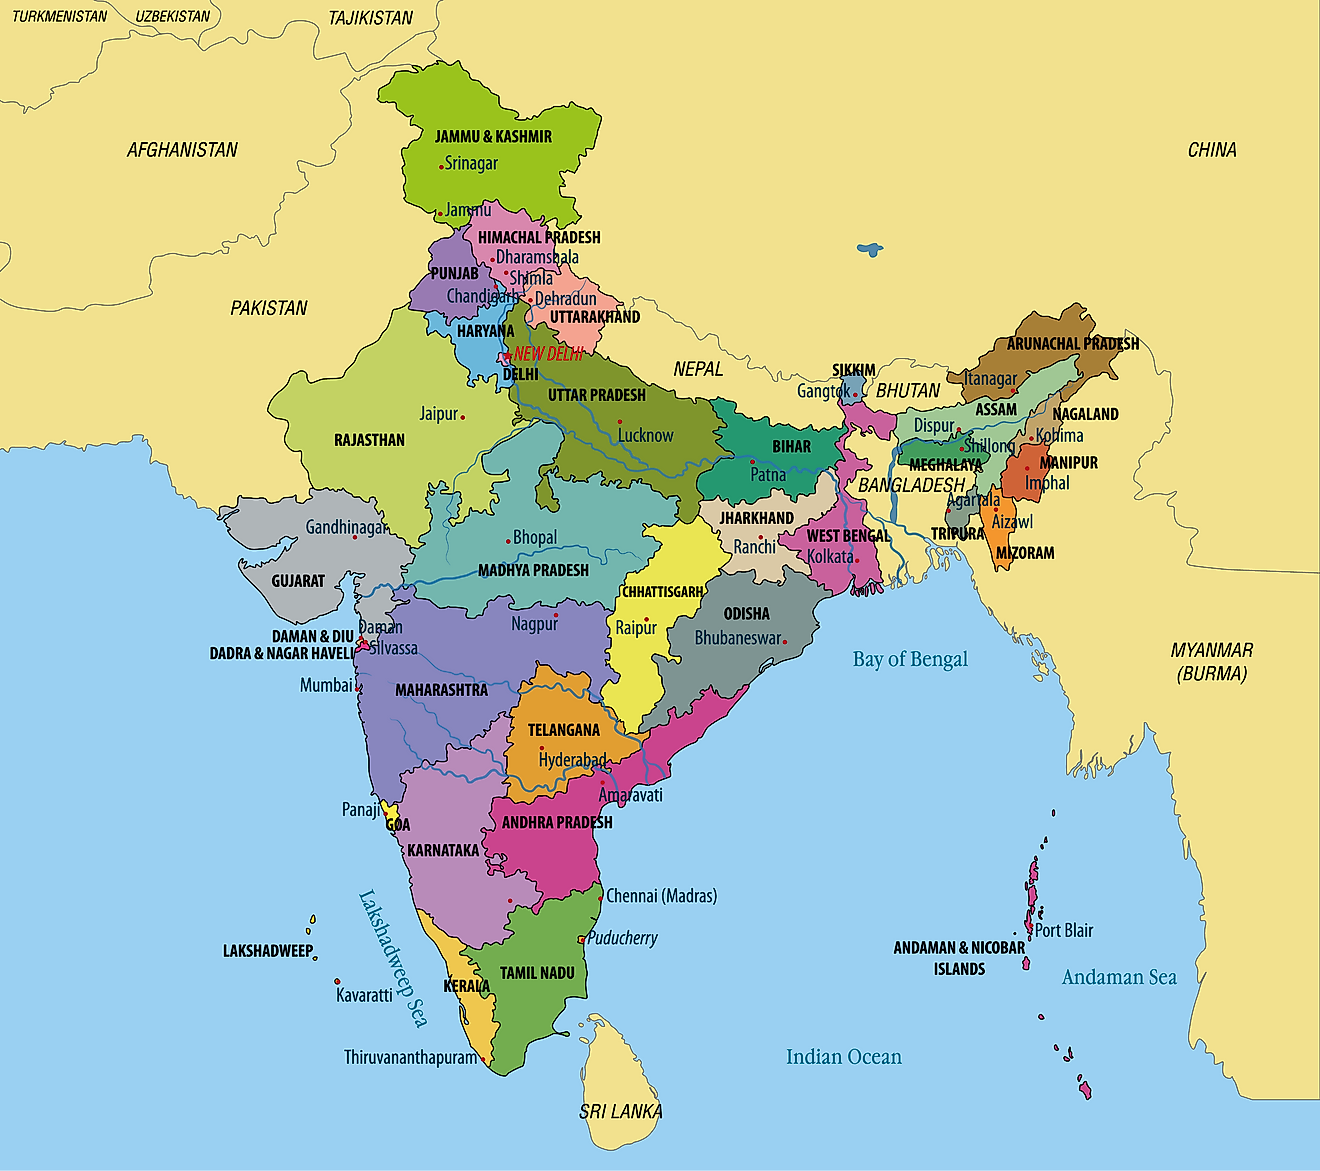 all-states-in-india-map-states-and-union-territories-of-india